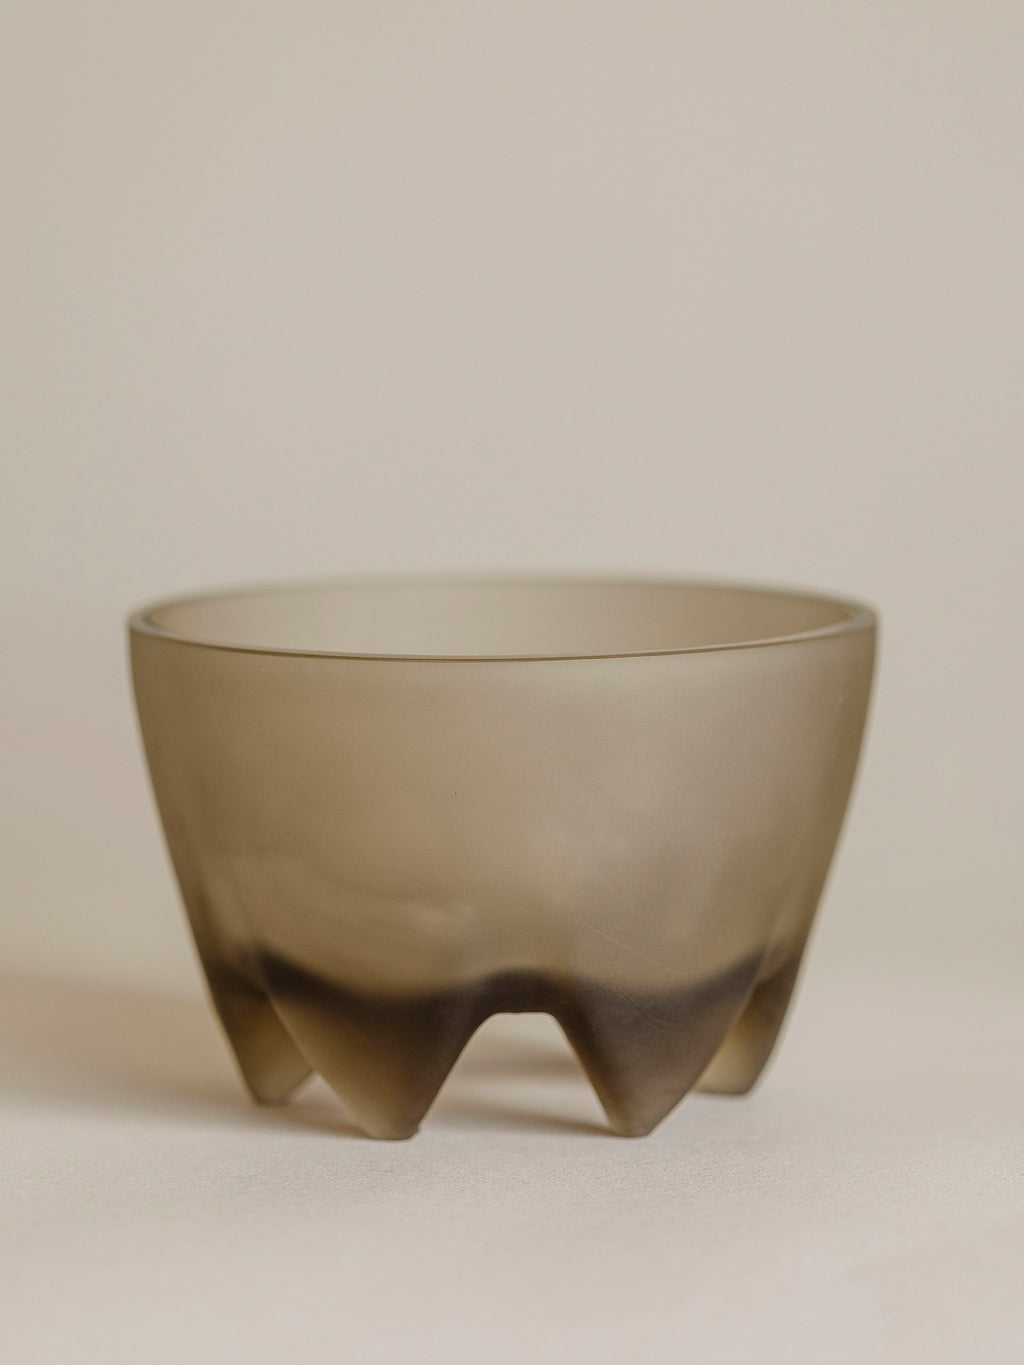 Glass Footed Bowls